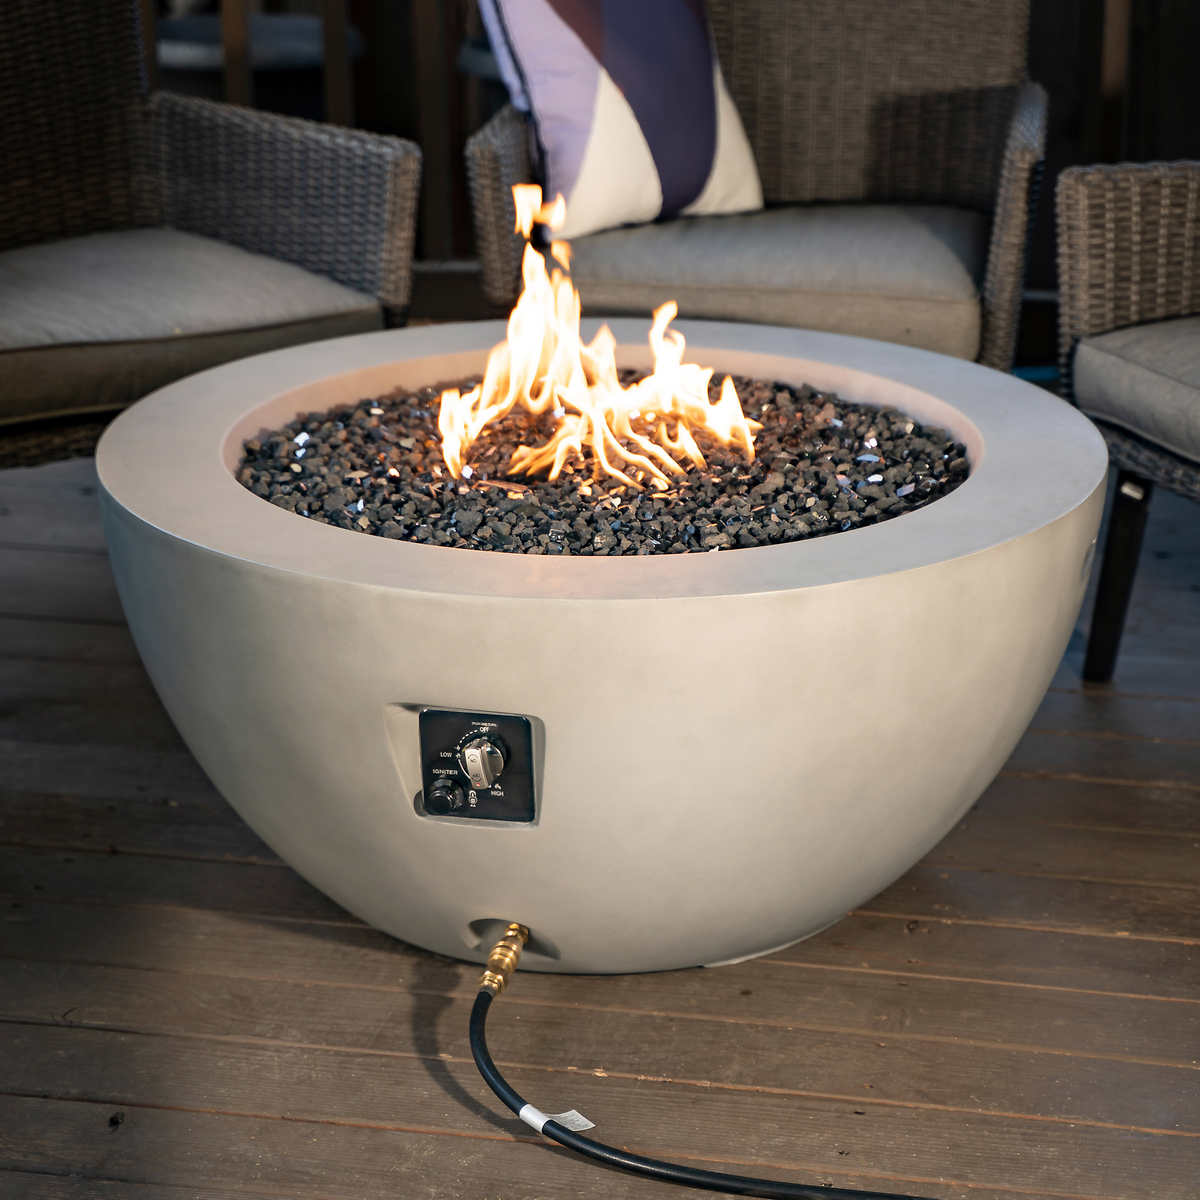 Faux Concrete Gas Fire Pit Costco, Can You Use A Gas Fire Pit On A Deck